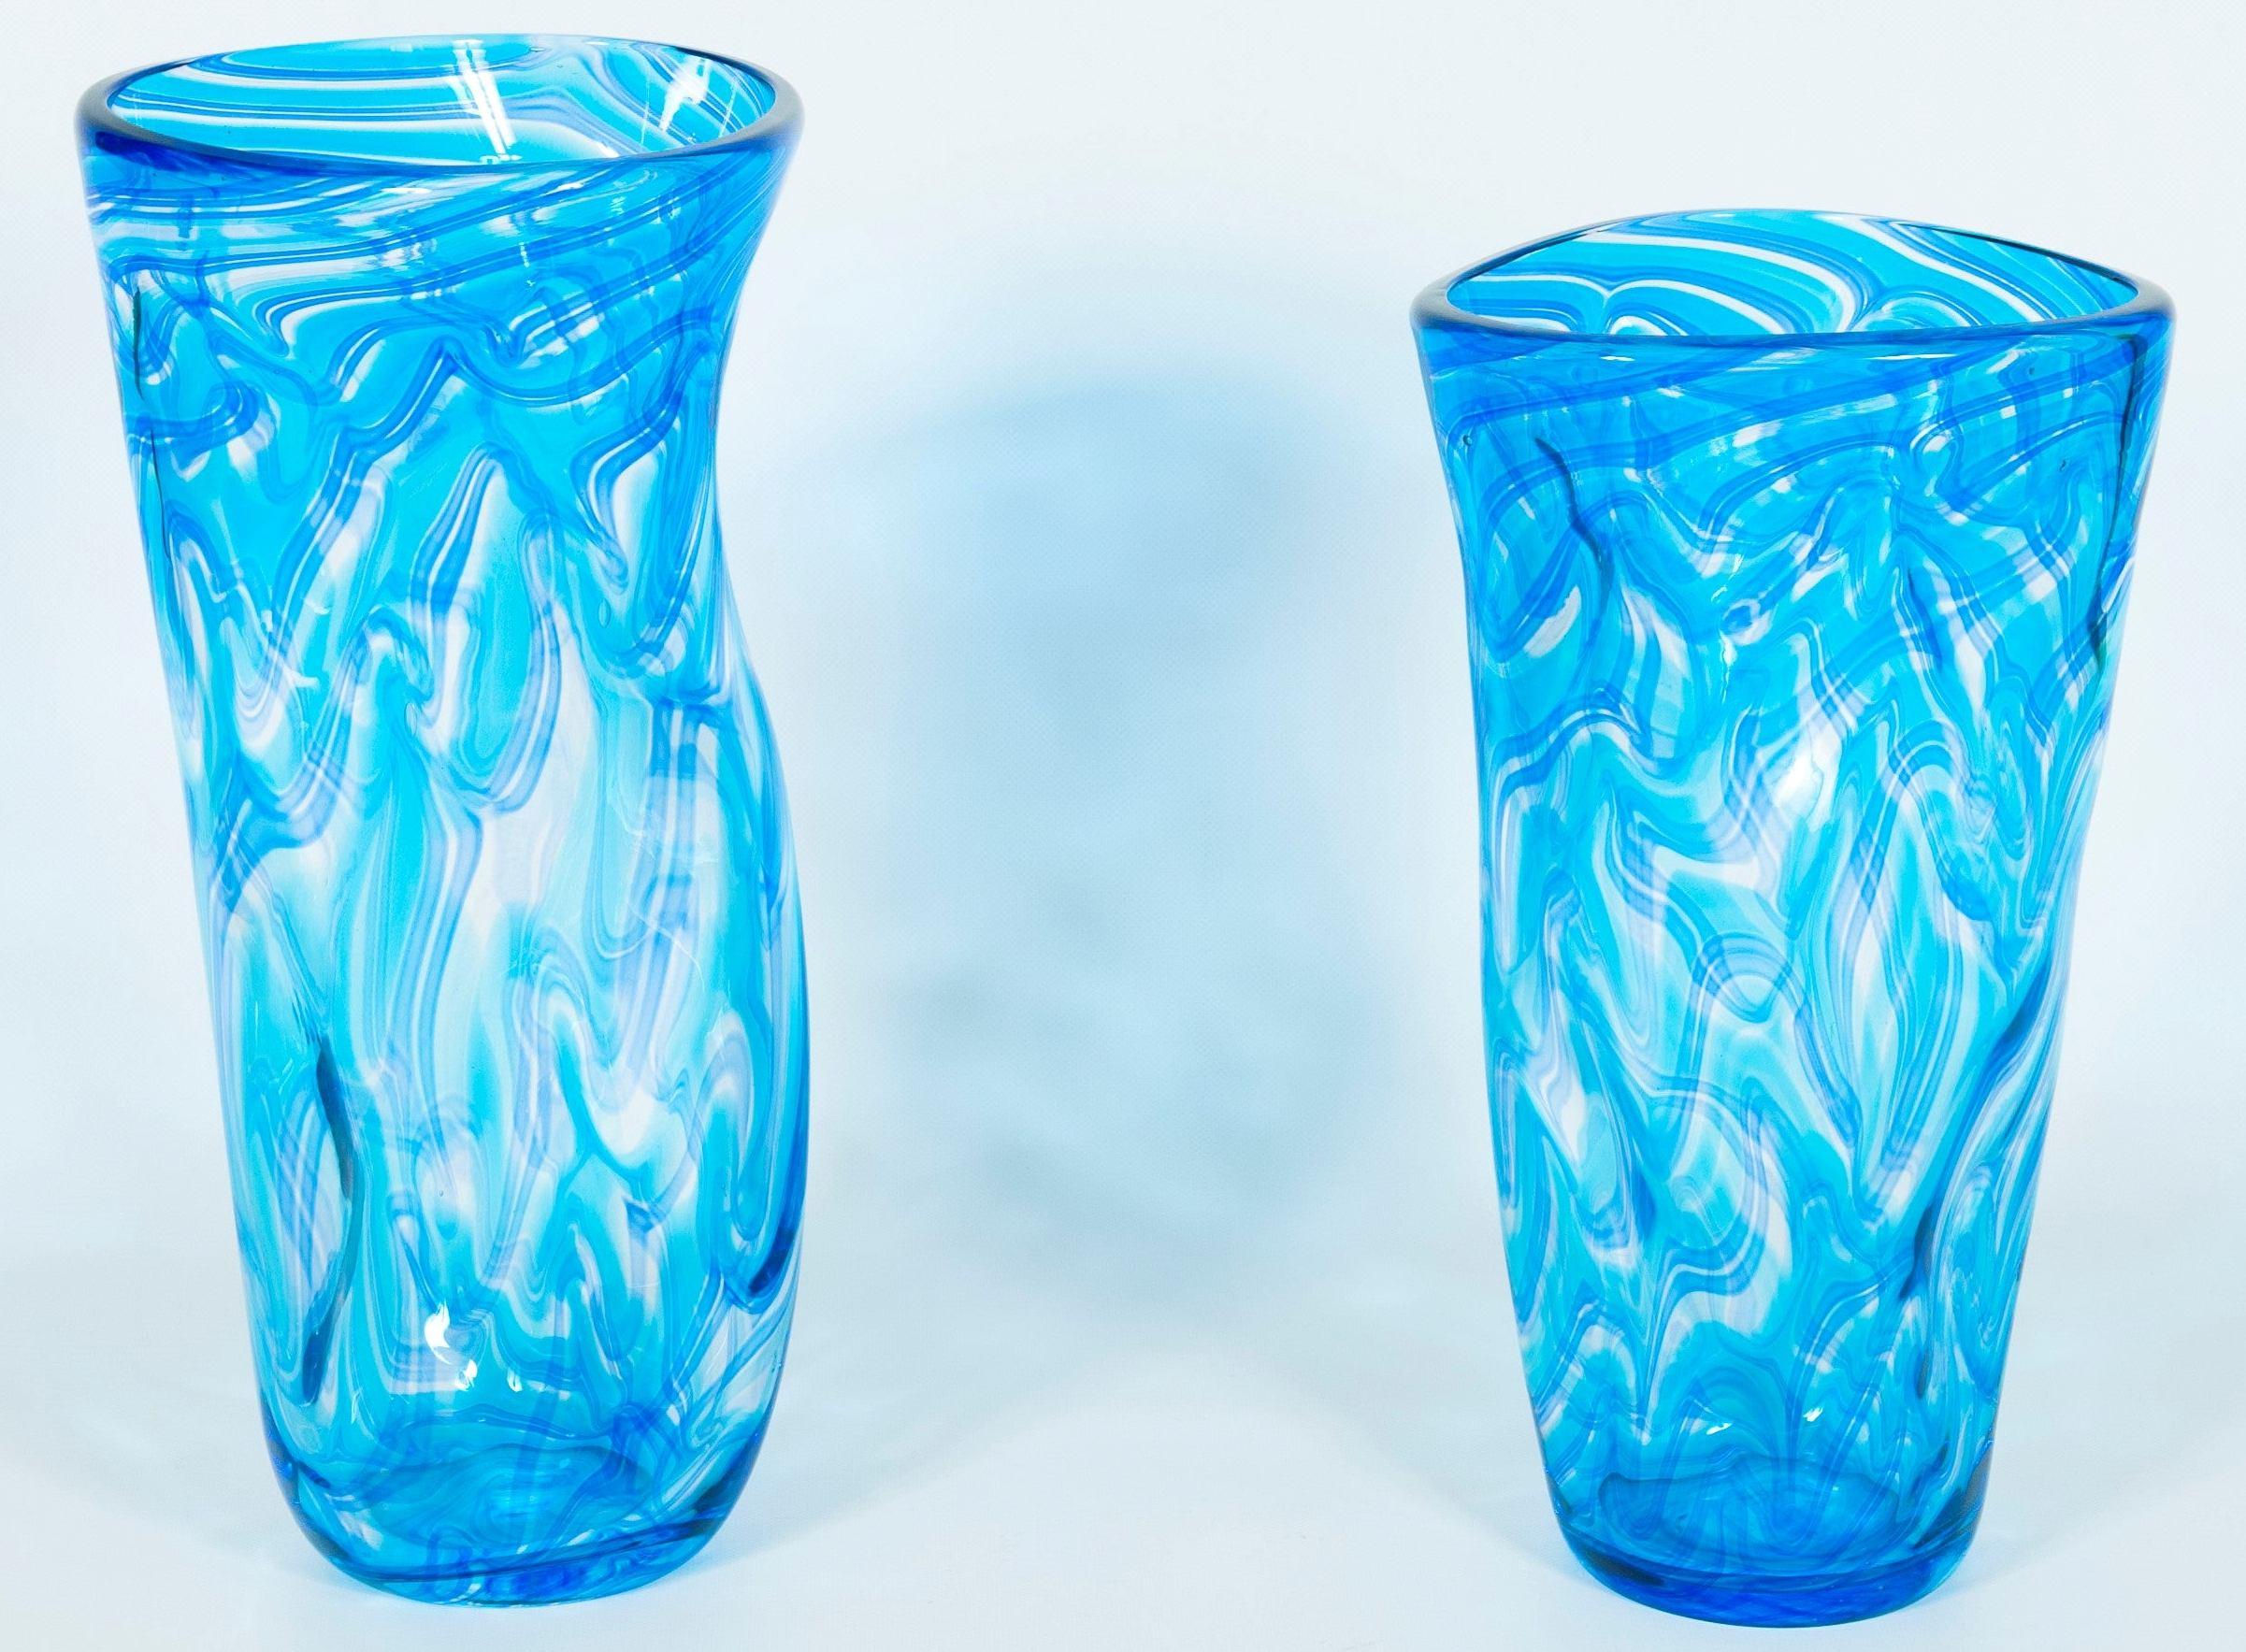 Pair of twisted vases in blown Murano glass blue color with waves pattern, Italy. Huge size, and majestic design, and Italian manufacture.
A fantastic couple of contemporary vases in blown Murano glass handcrafted in the island of Murano, Venice,